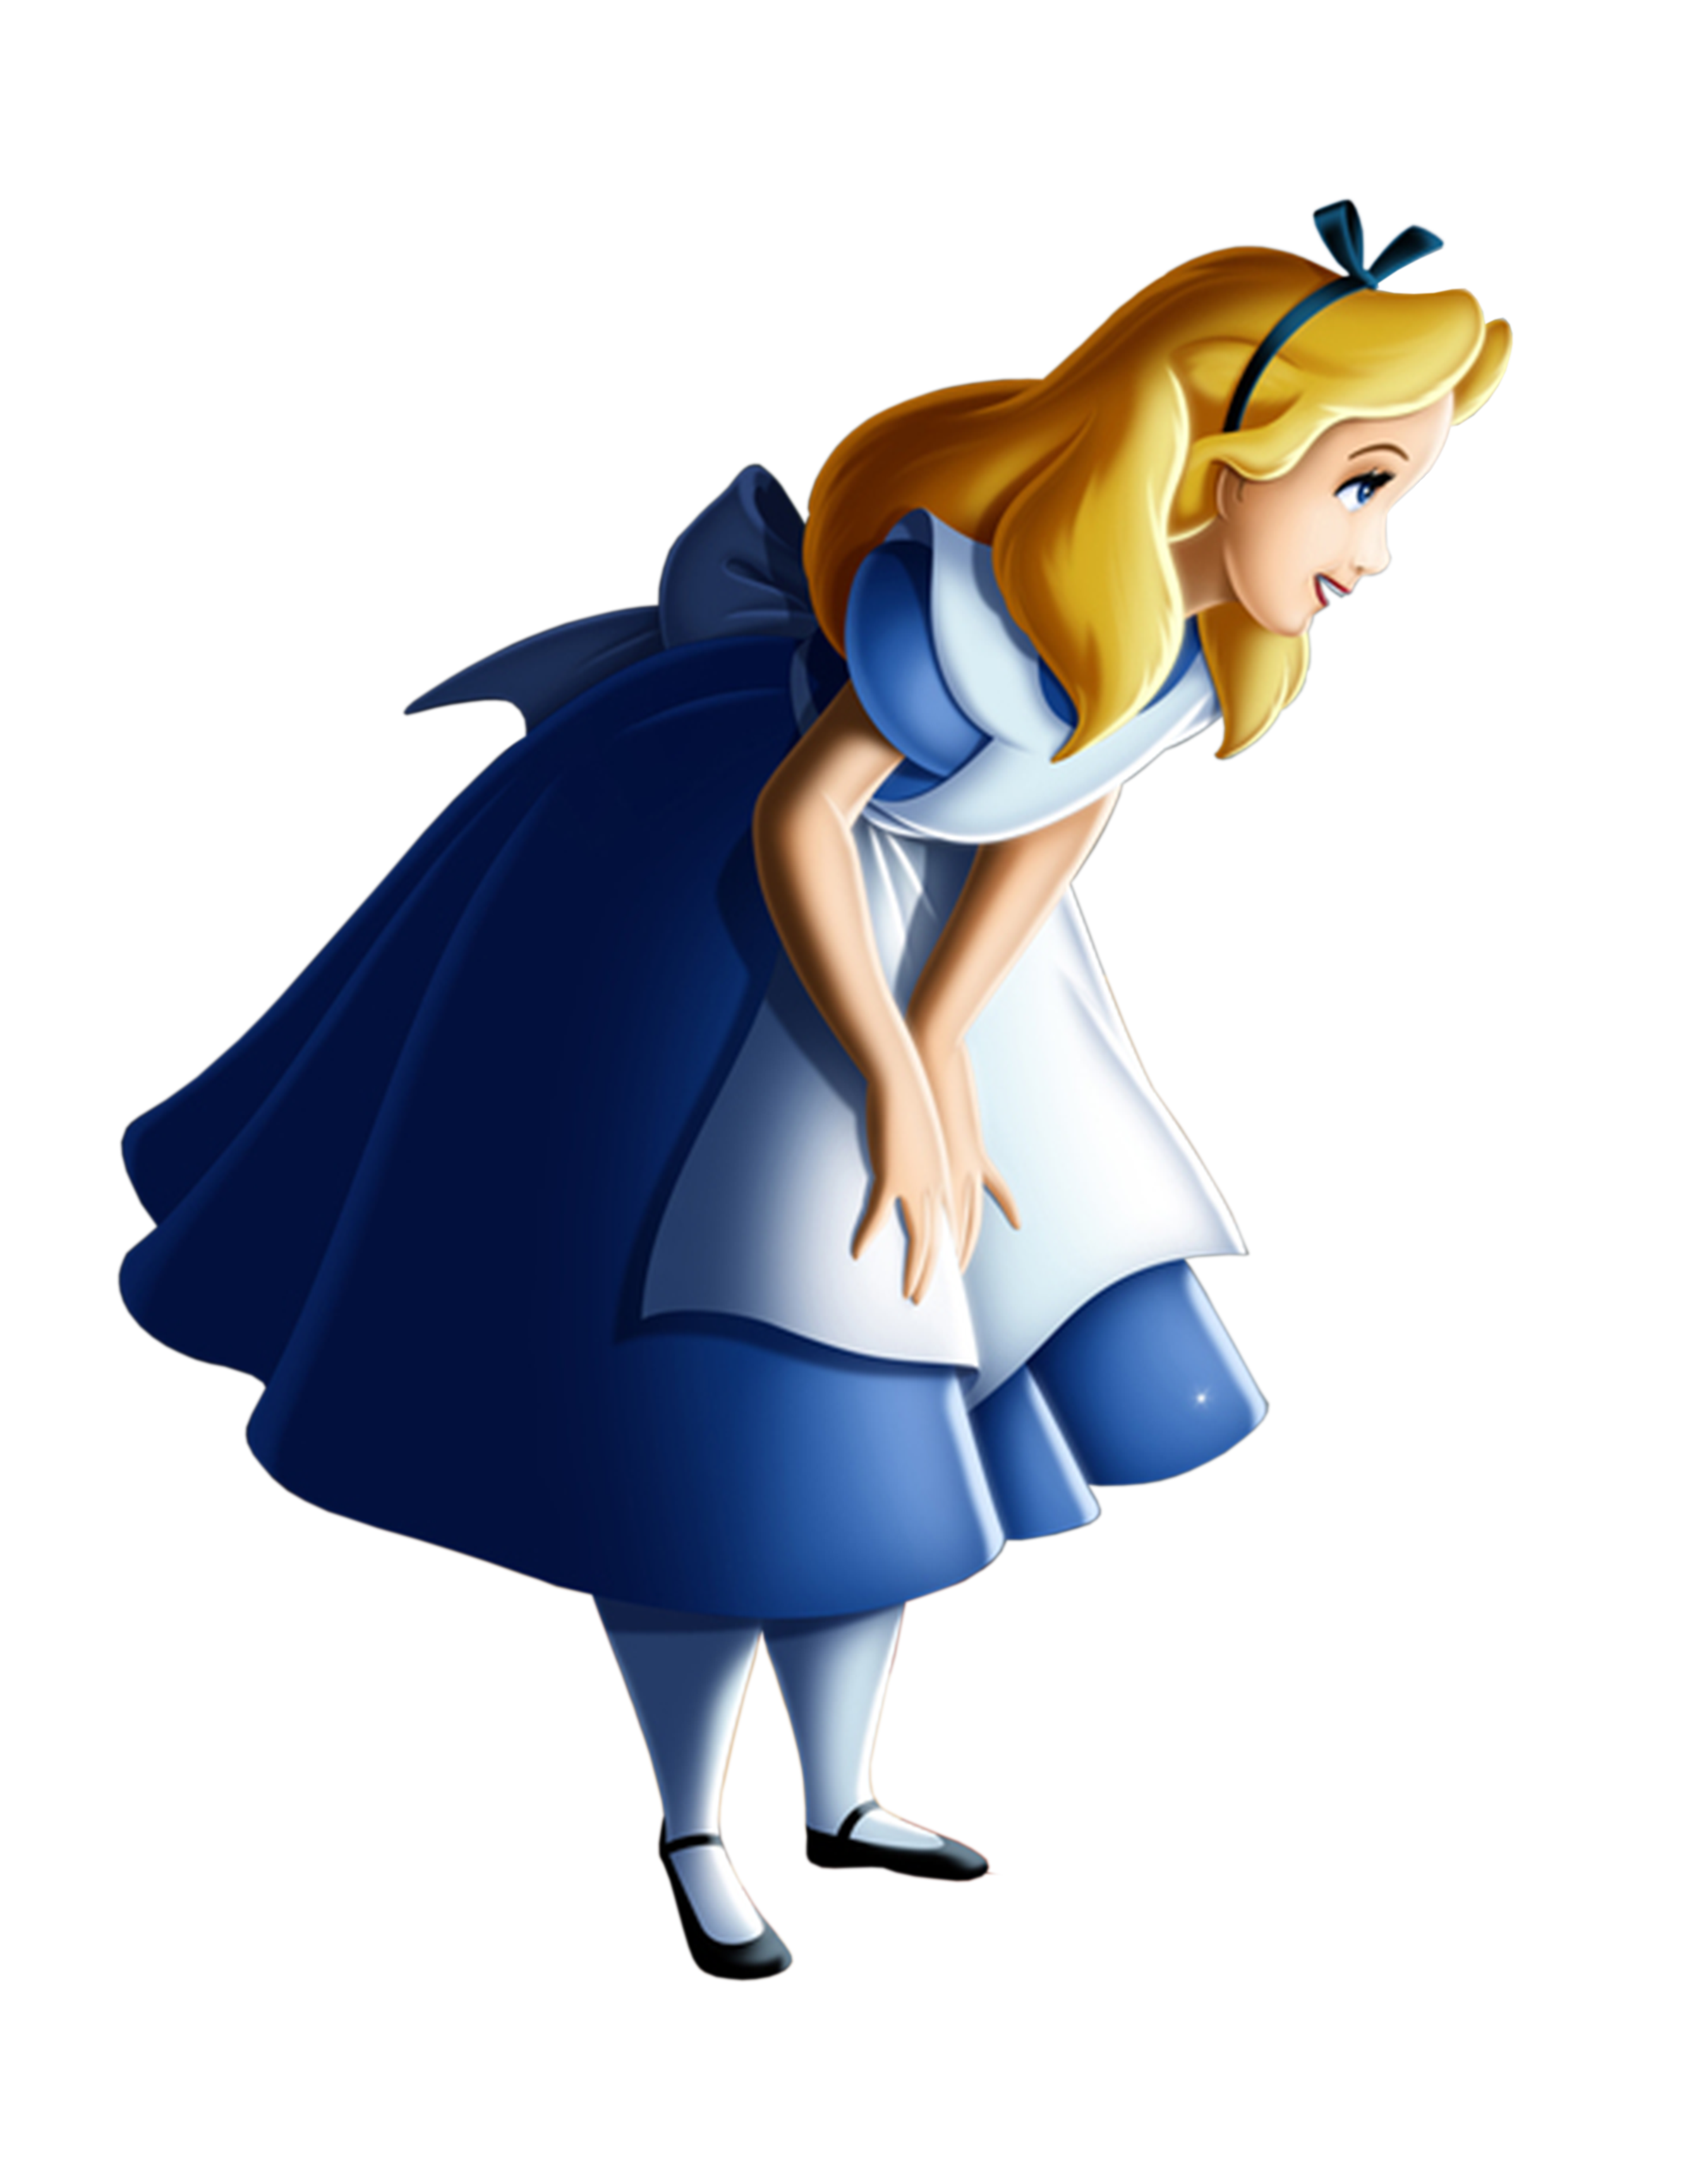 https://static.wikia.nocookie.net/p__/images/6/6e/Alice_d23_by_disneyfreak19_dh15mbe.png/revision/latest?cb=20240311214900&path-prefix=protagonist